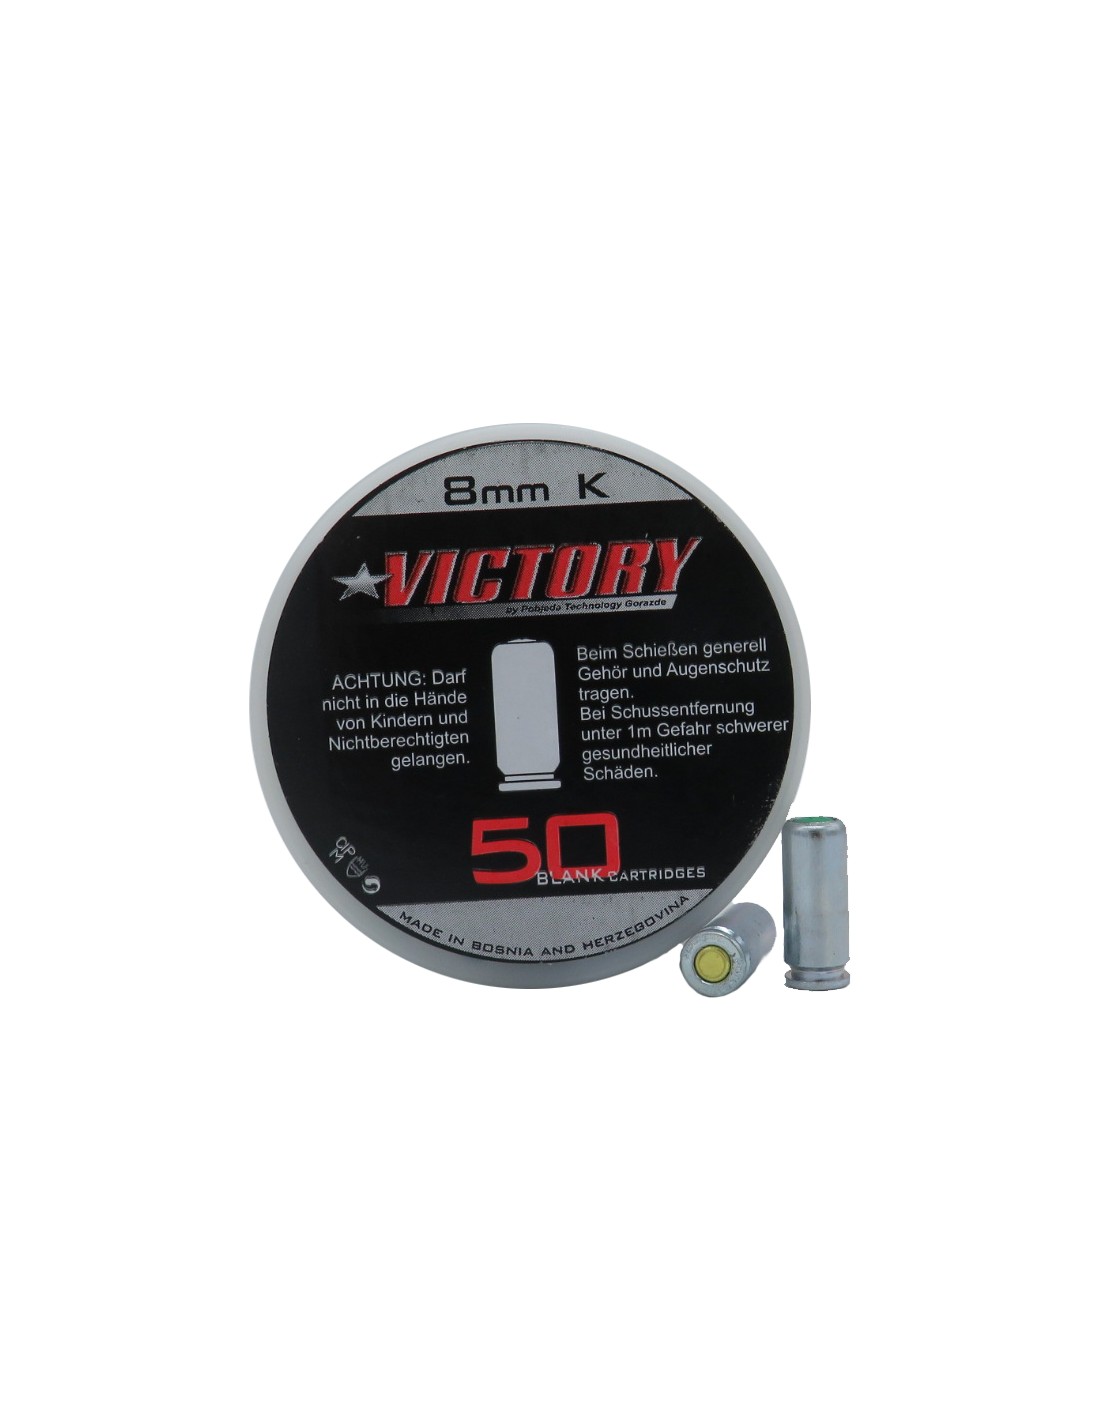 Cartucce a salve Victory 8 mm